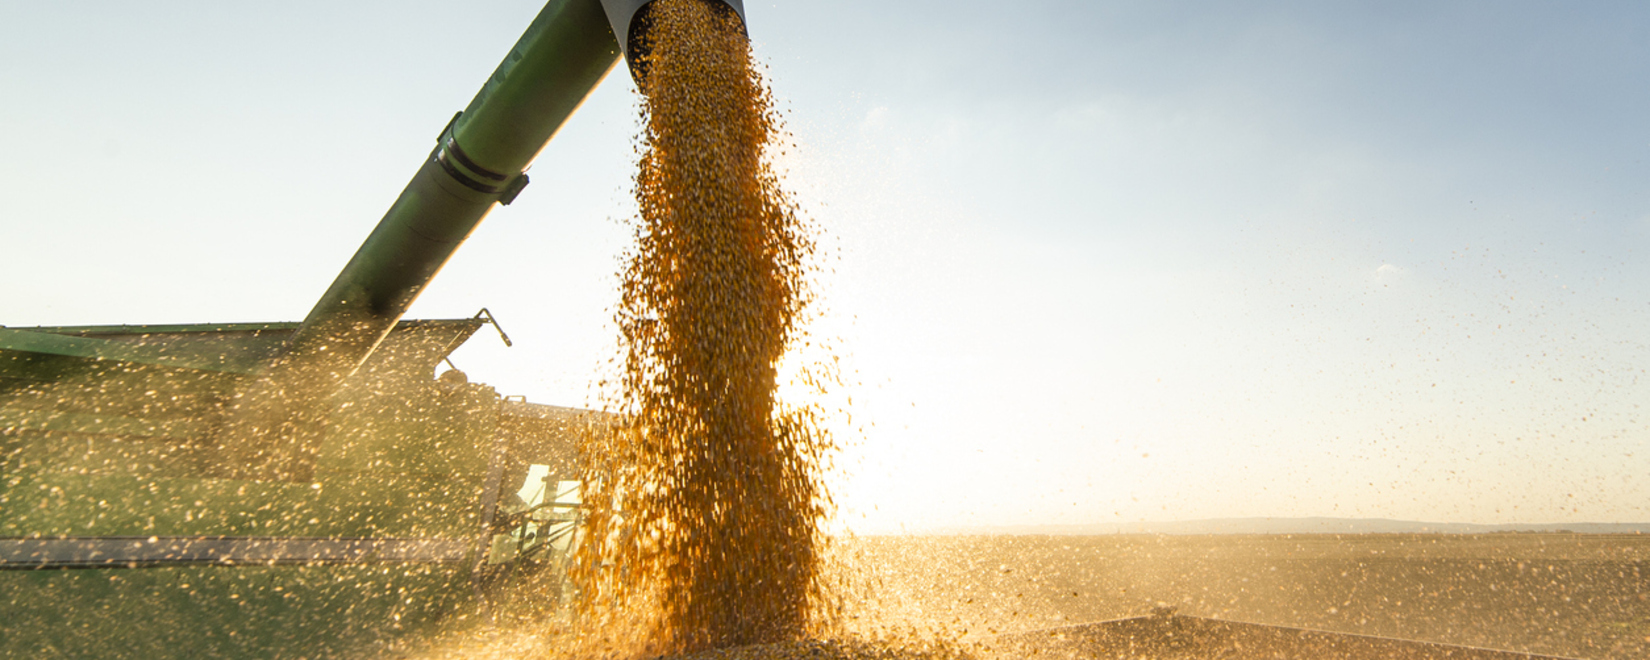 There is every chance that wheat exports will be increased compared to the previous year